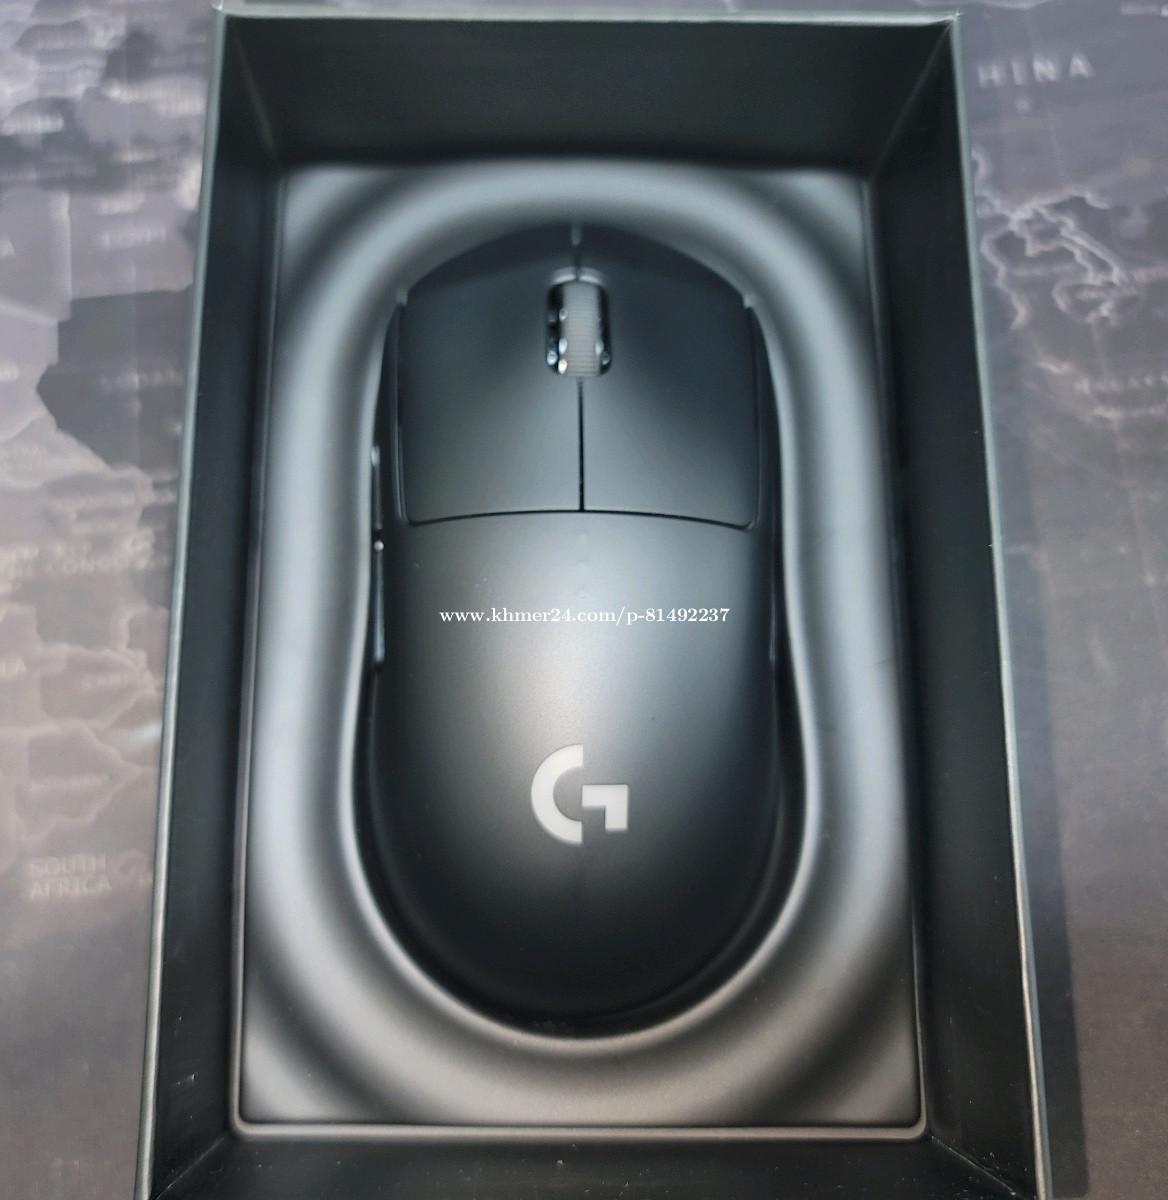  Logitech G Pro Wireless Gaming Mouse with Esports